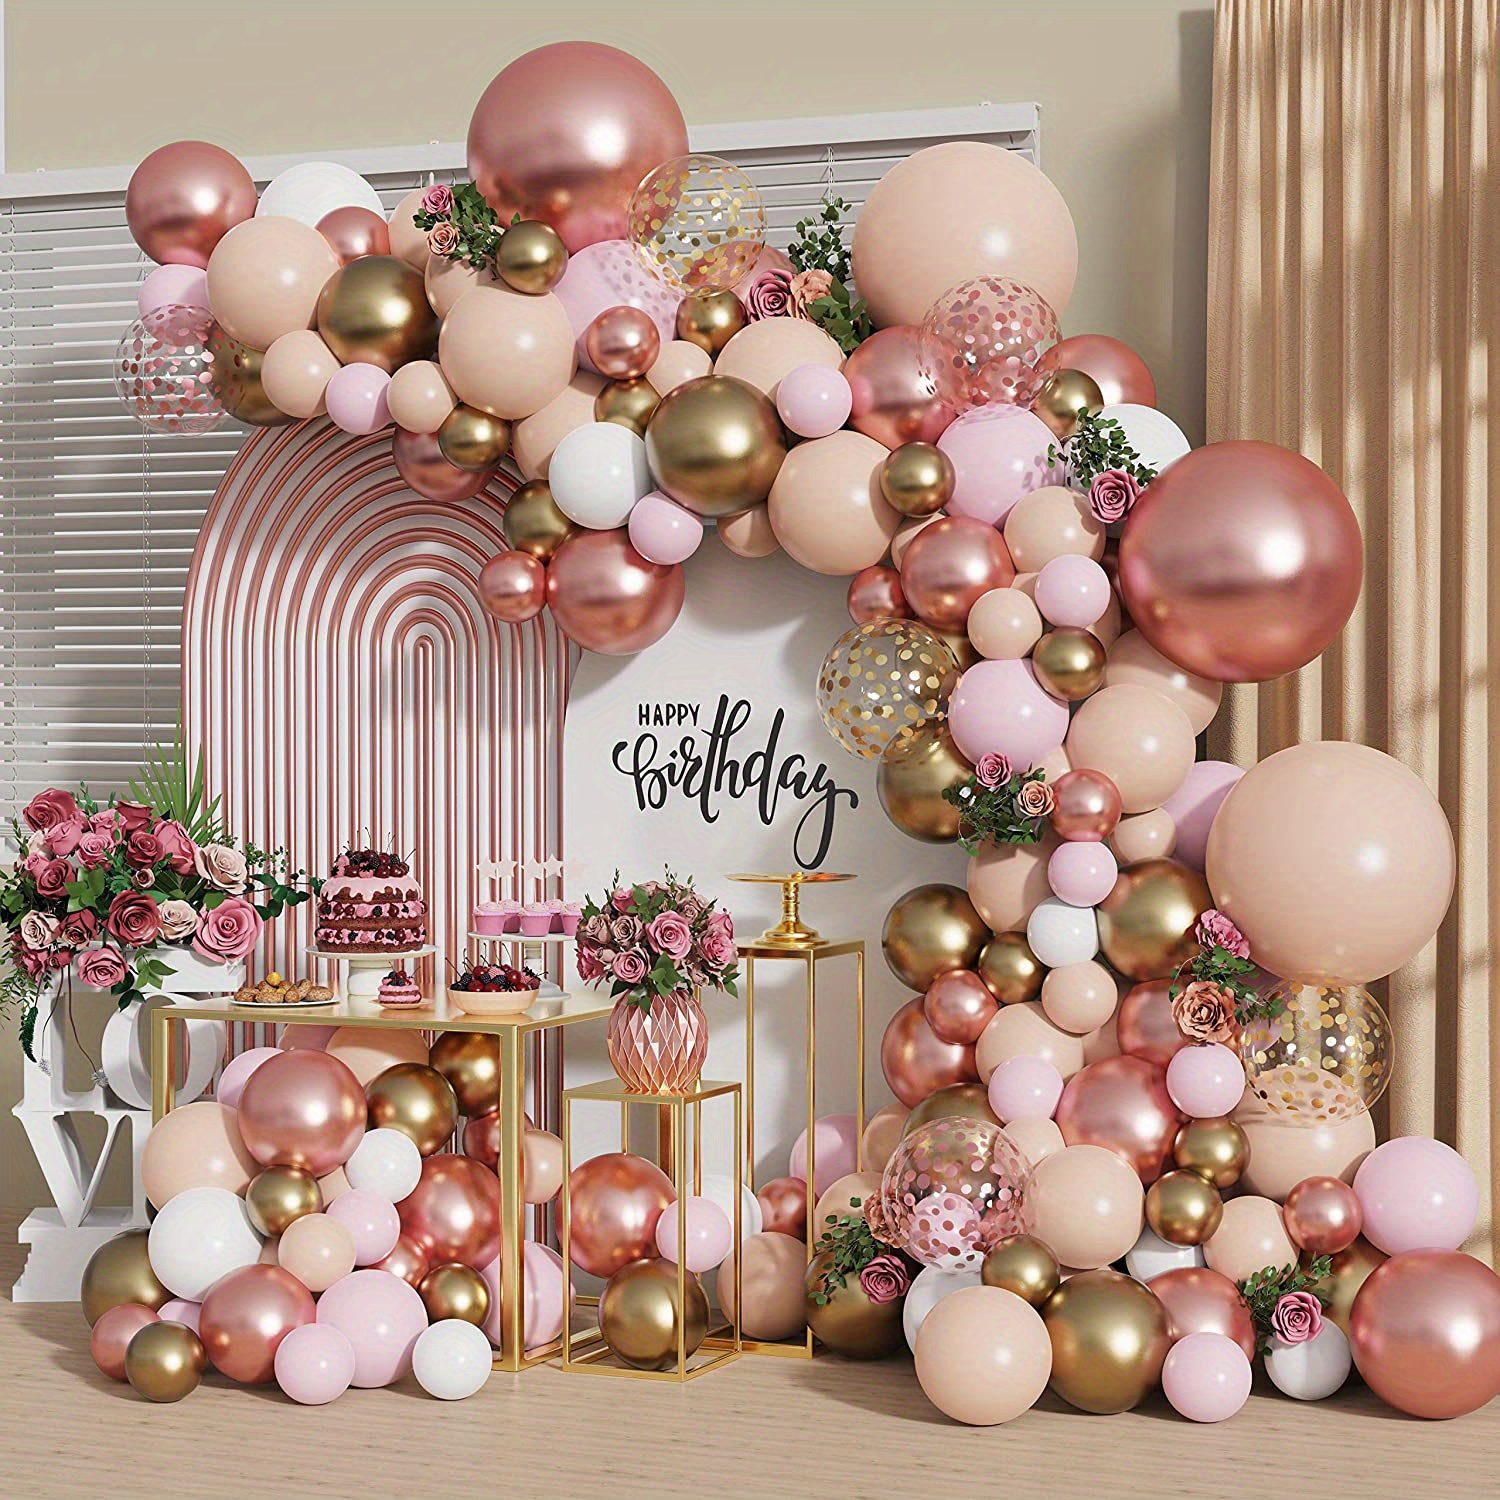 balloon arches decorations